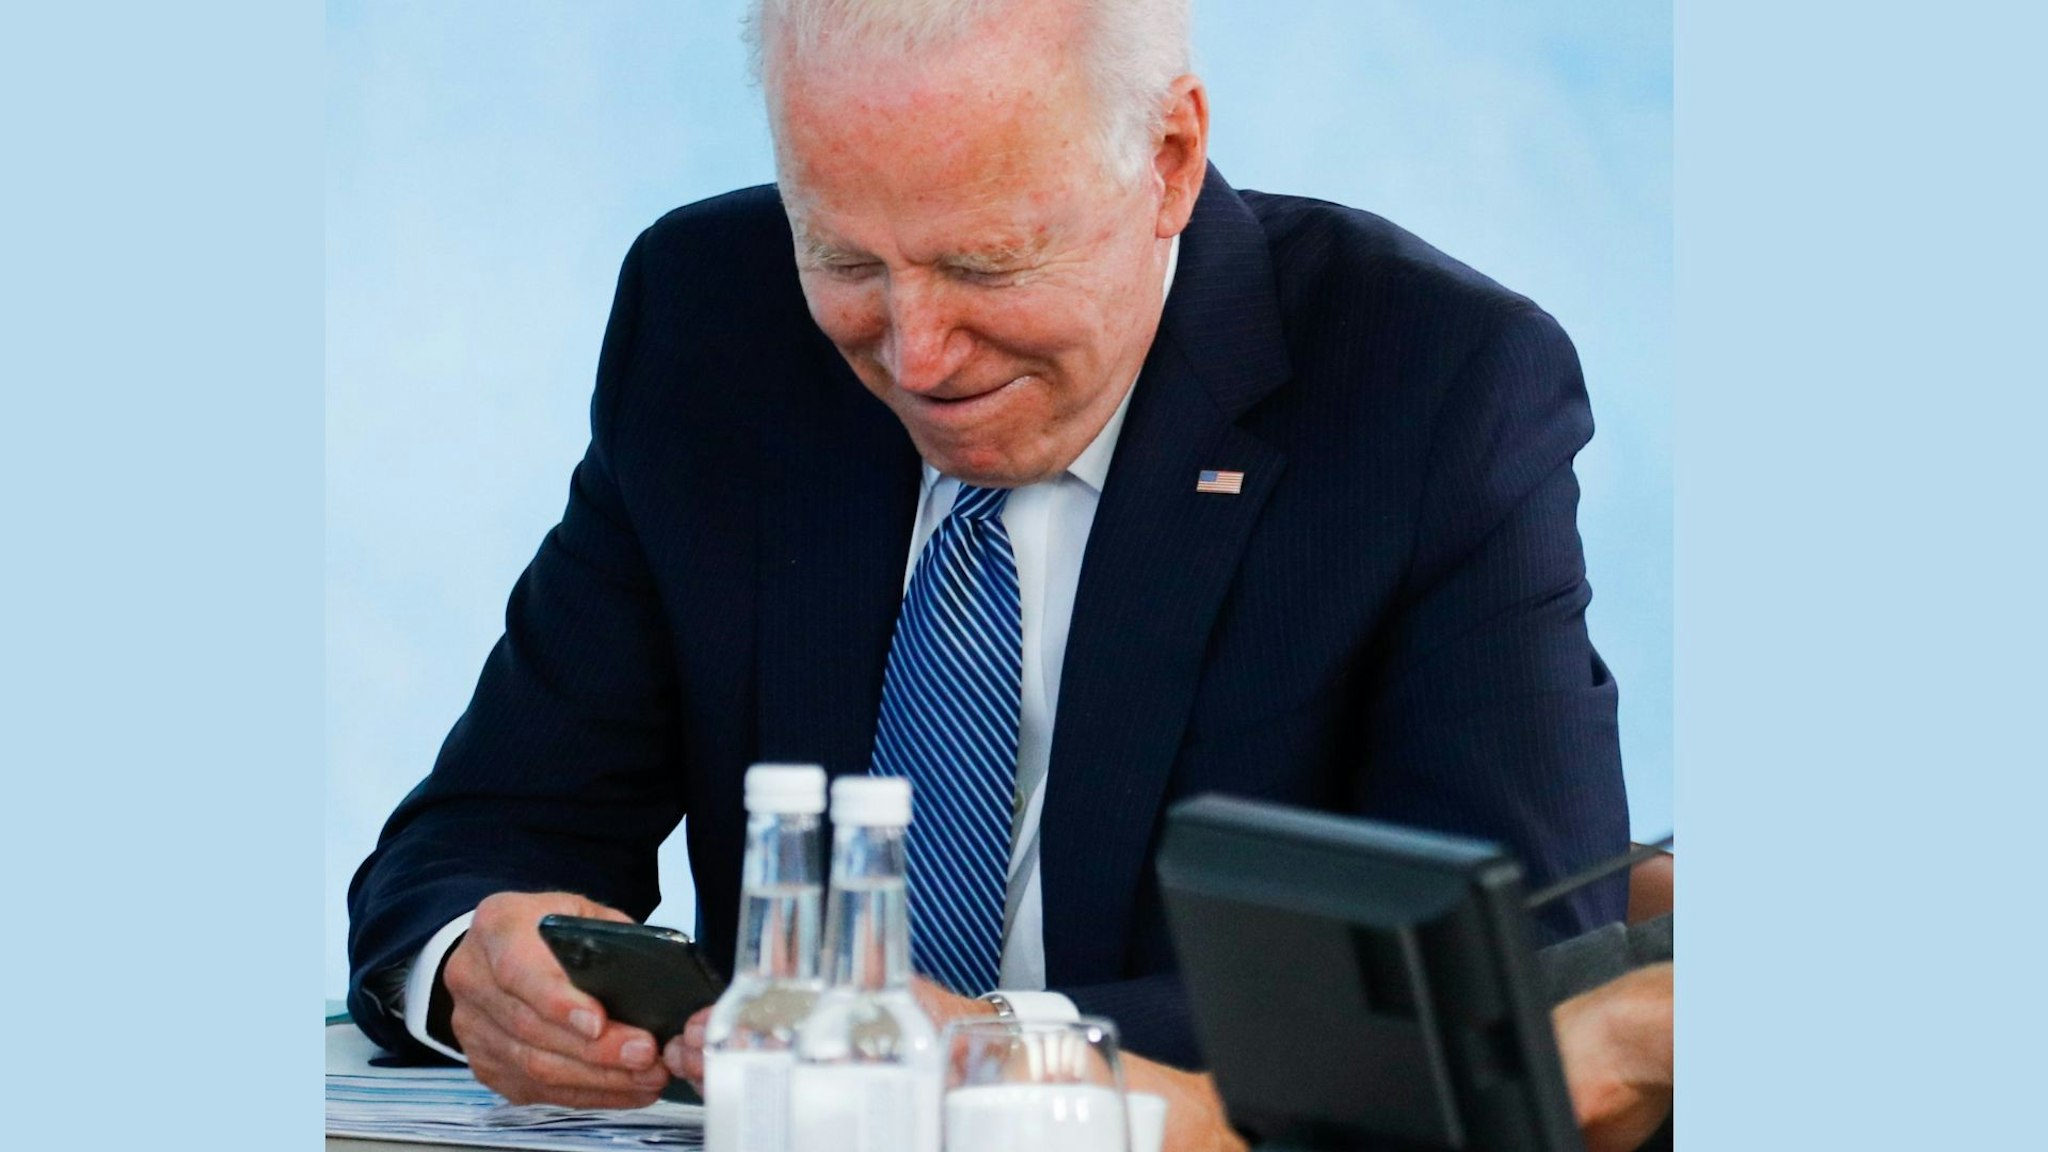 CARBIS BAY, CORNWALL - JUNE 13: U.S. President Joe Biden reads his phone as he attends a plenary session during G7 summit in Carbis Bay on June 13, 2021 in Cornwall, United Kingdom. UK Prime Minister, Boris Johnson, hosts leaders from the USA, Japan, Germany, France, Italy and Canada at the G7 Summit.